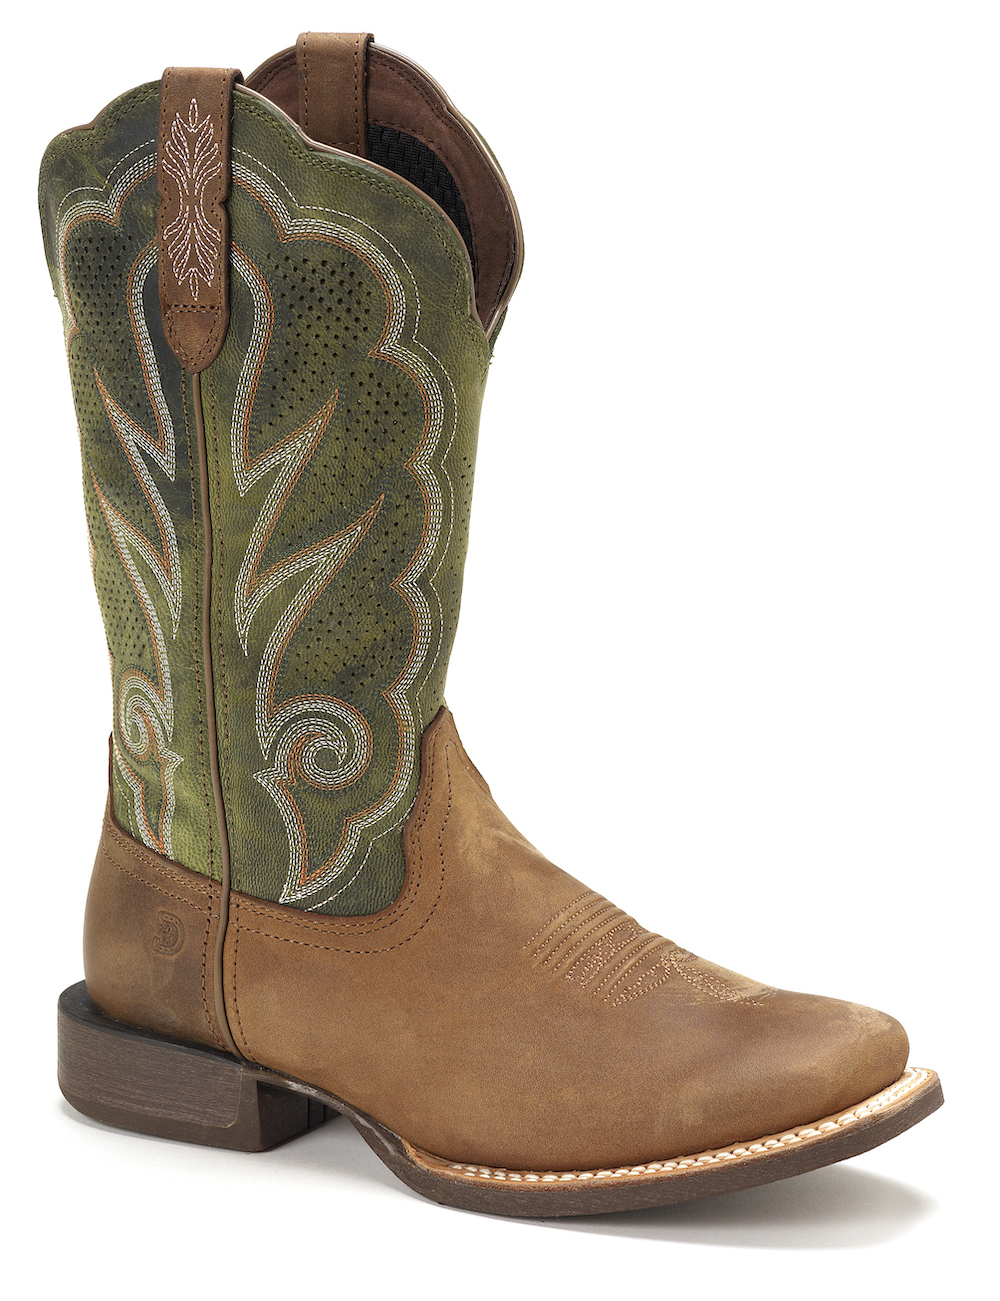 Women's Cowgirl Boots | Afterpay \u0026 Free 